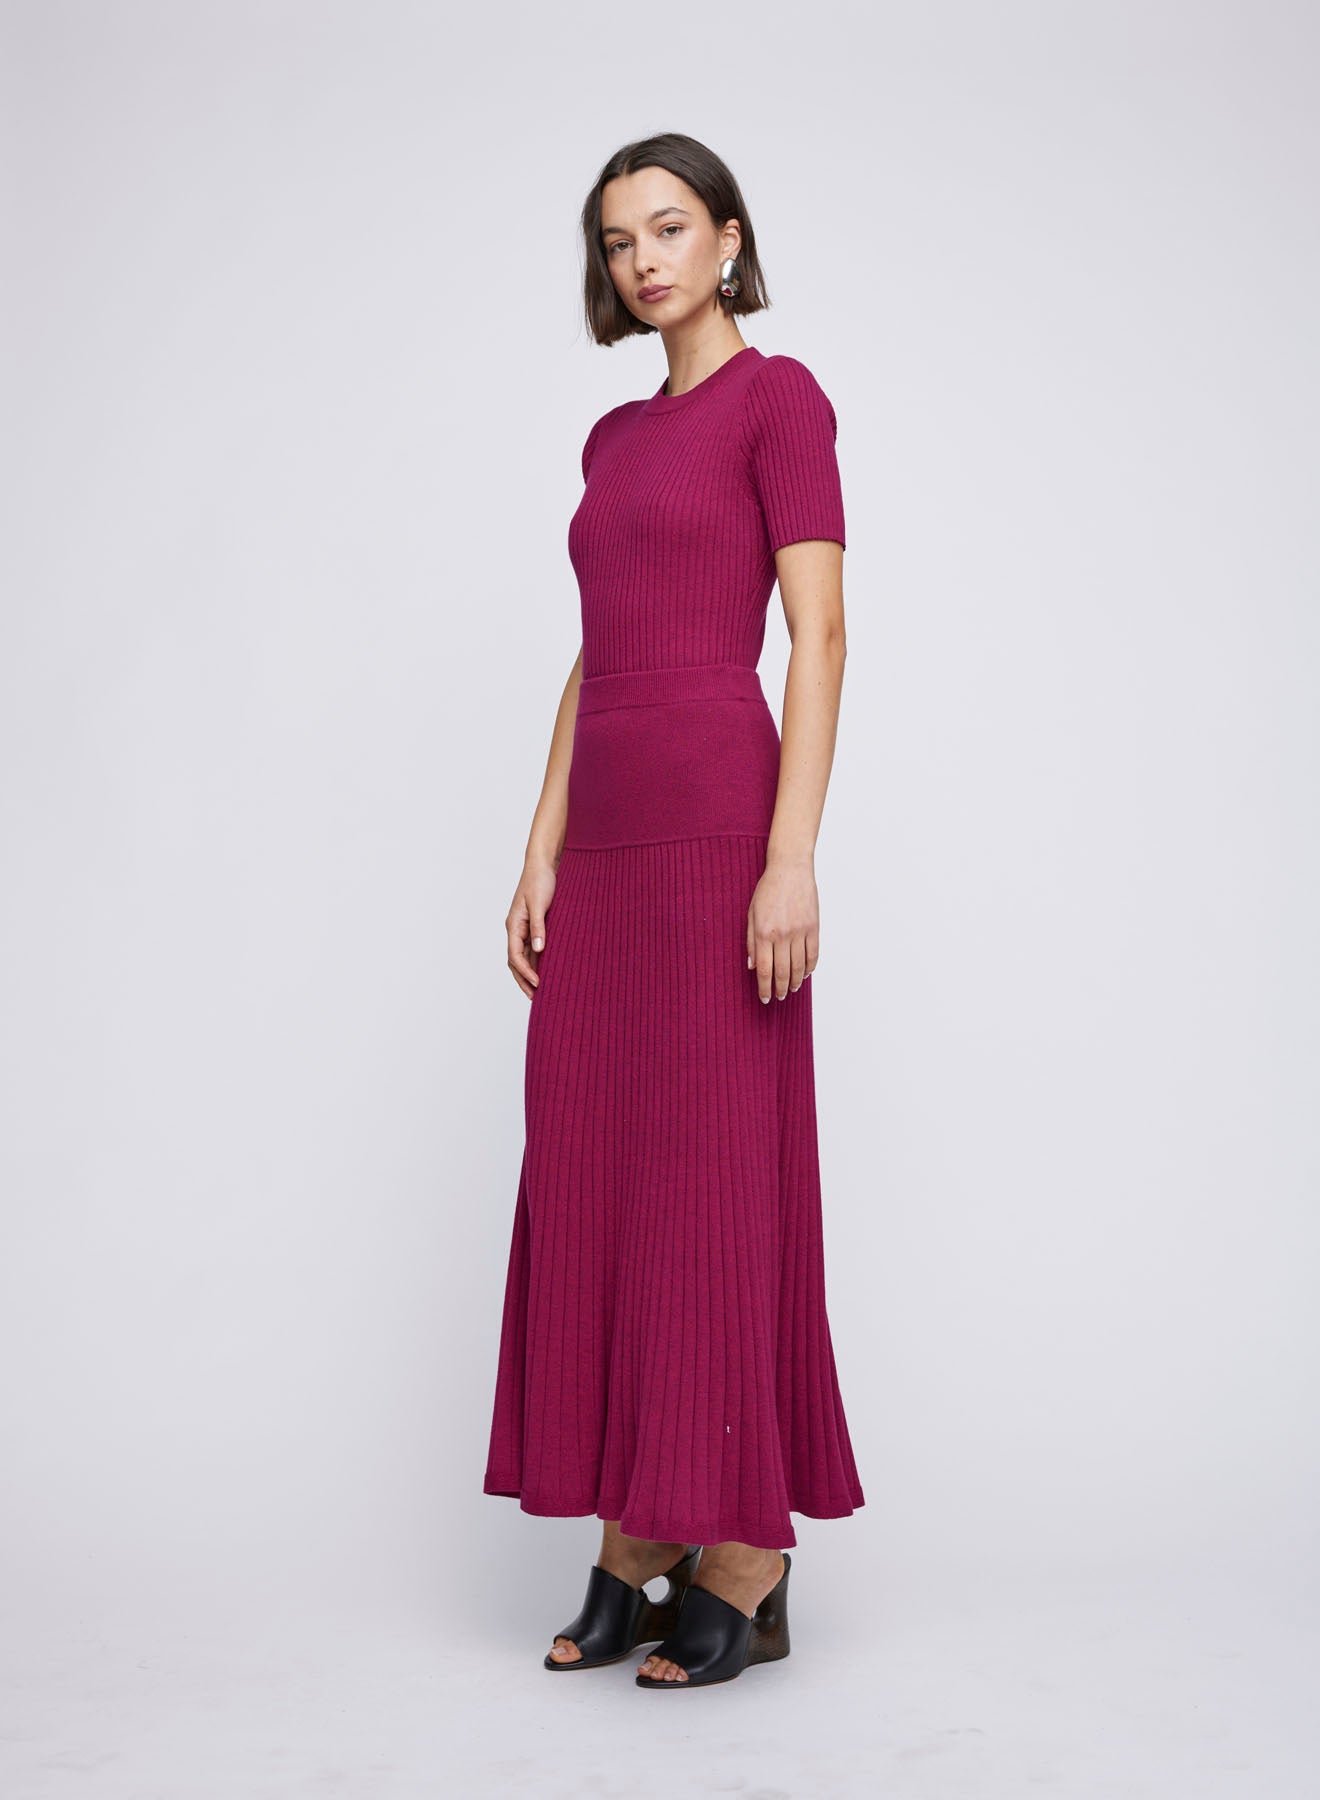 Cotton rib panelled A-line skirt with elasticated waistband. Knit skirt, red skirts, cherry skirts, full length skirts, casual skirts, everyday skirts, skirts for work.